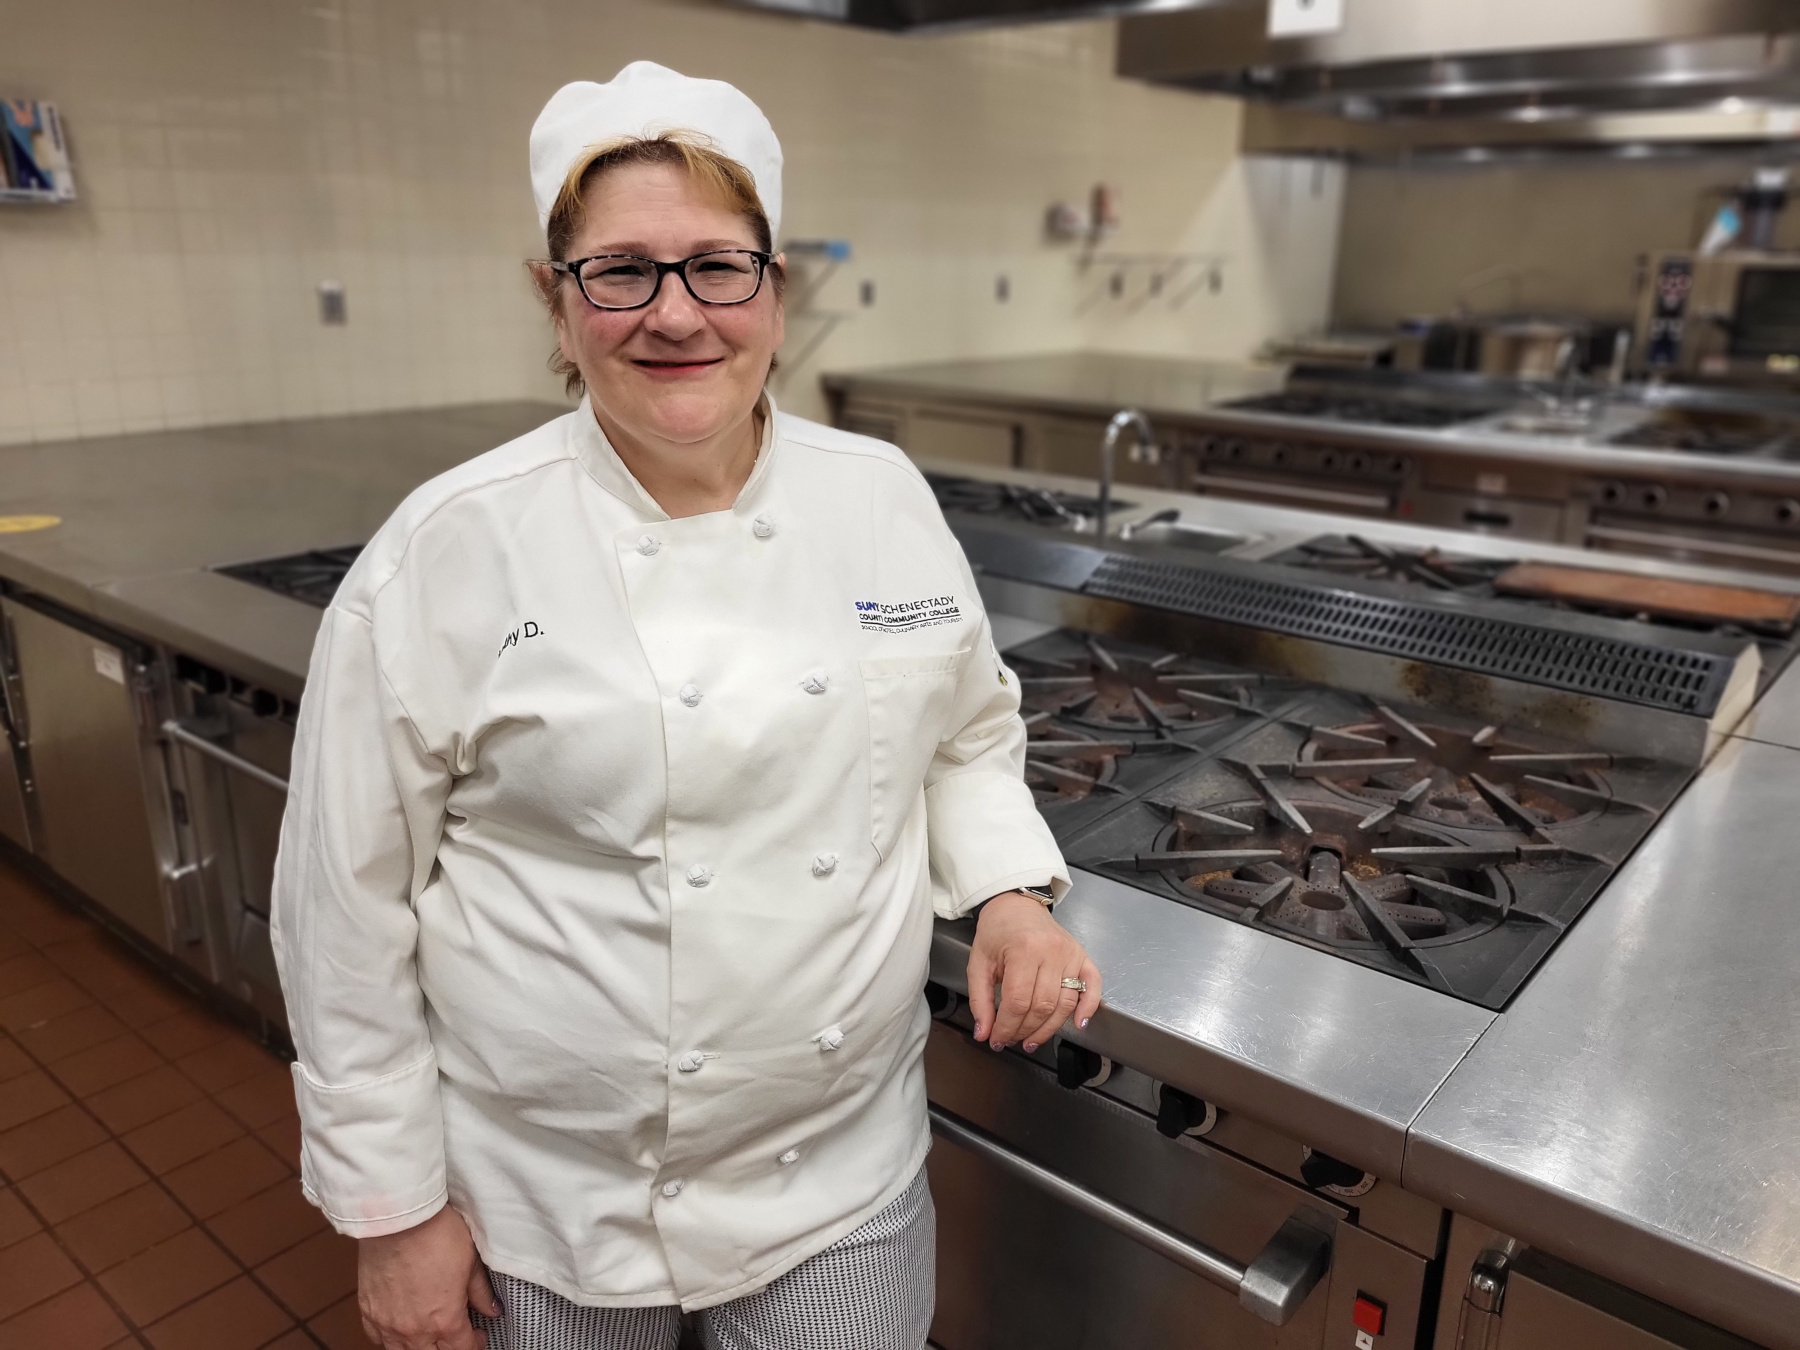 Kathy Duffy-Darmetko standing near stove in Culinary Arts Lab, smiling